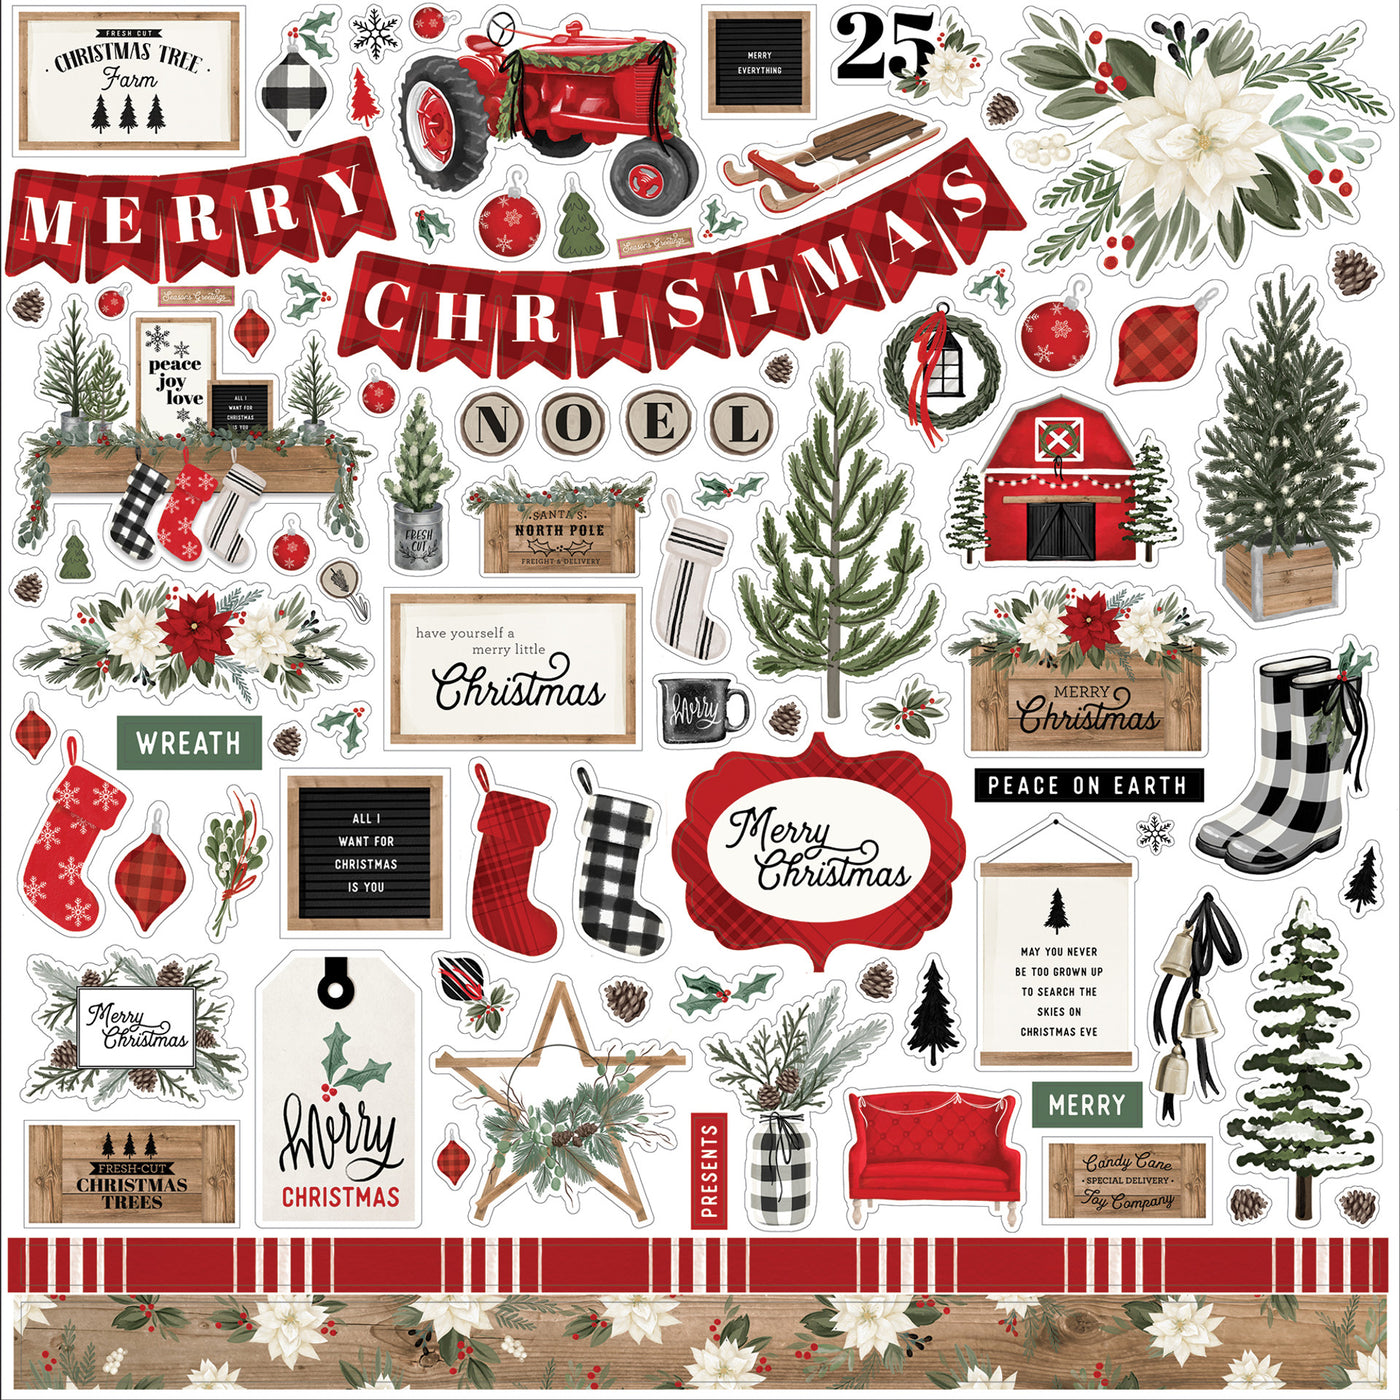 Farmhouse Christmas Elements 12" x 12" Cardstock Stickers from the Farmhouse Christmas Collection by Carta Bella. These stickers include a red tractor, stockings, Christmas trees, ornaments, banners, and more!  